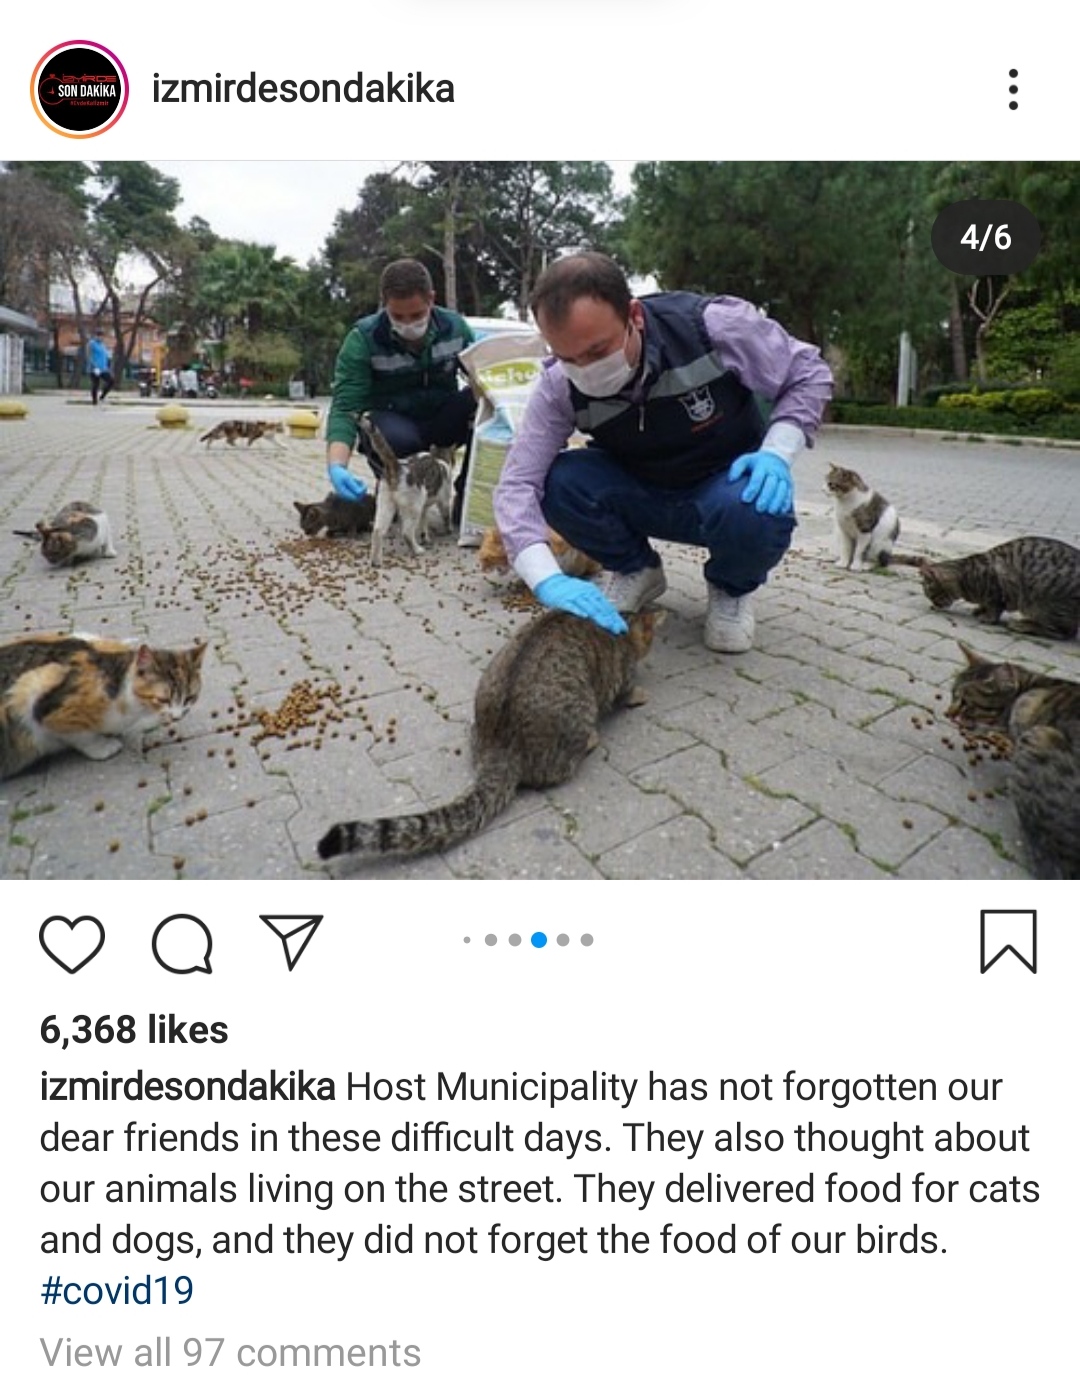 tree - izmirdesondakika 46 Qy ... > 6,368 izmirdesondakika Host Municipality has not forgotten our dear friends in these difficult days. They also thought about our animals living on the street. They delivered food for cats and dogs, and they did not forg